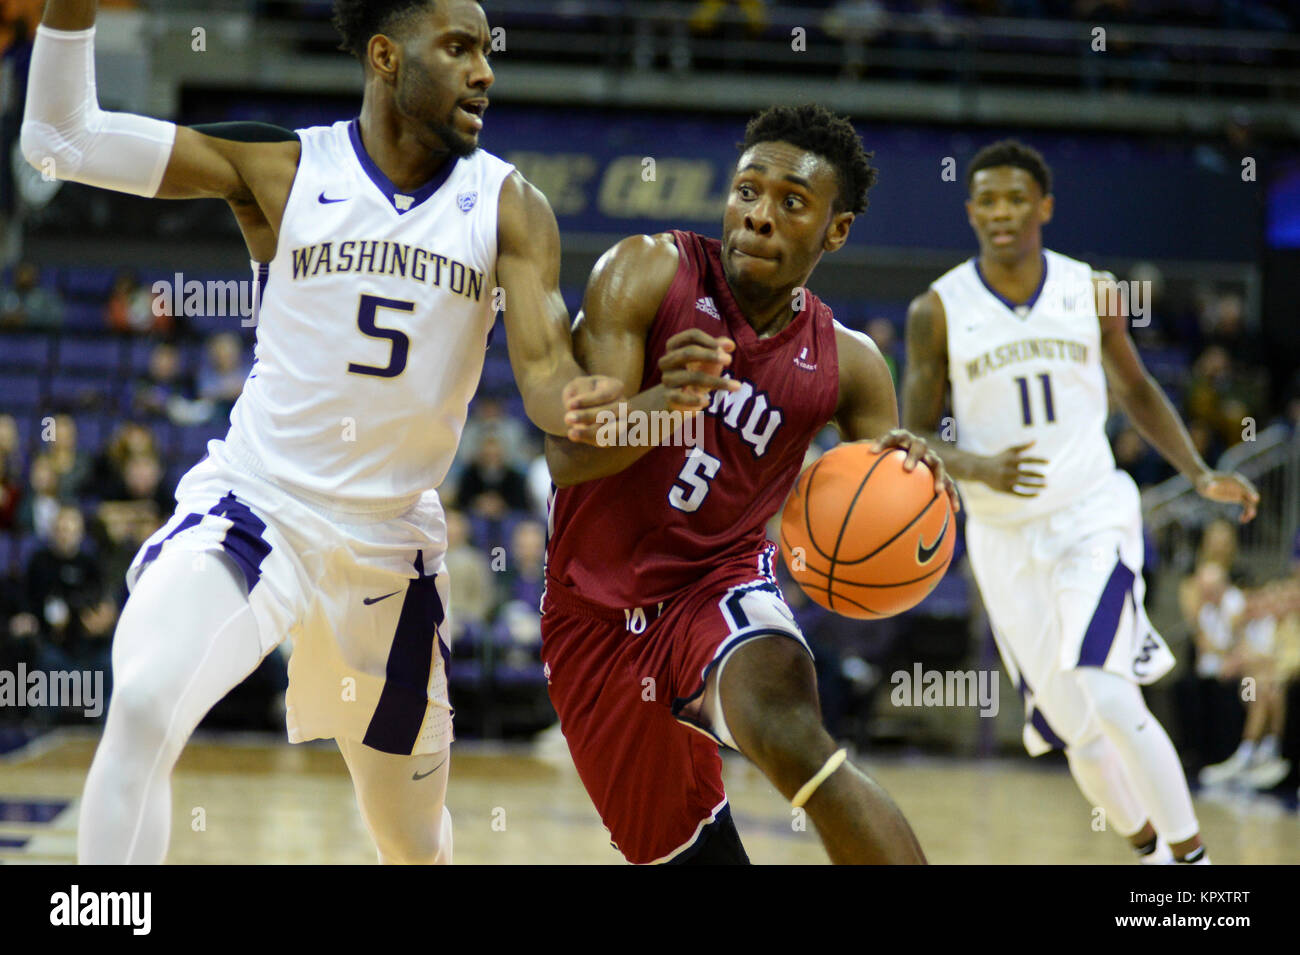 Seattle, WA, USA. 17th Dec, 2017. LMU guard James Batemon (5) drives the lane against UW defender Jaylen Nowell (5) during an NCAA basketball game between the Washington Huskies and LMU Lions. The game was played at Hec Ed Pavilion in Seattle, WA. Jeff Halstead/CSM/Alamy Live News Stock Photo